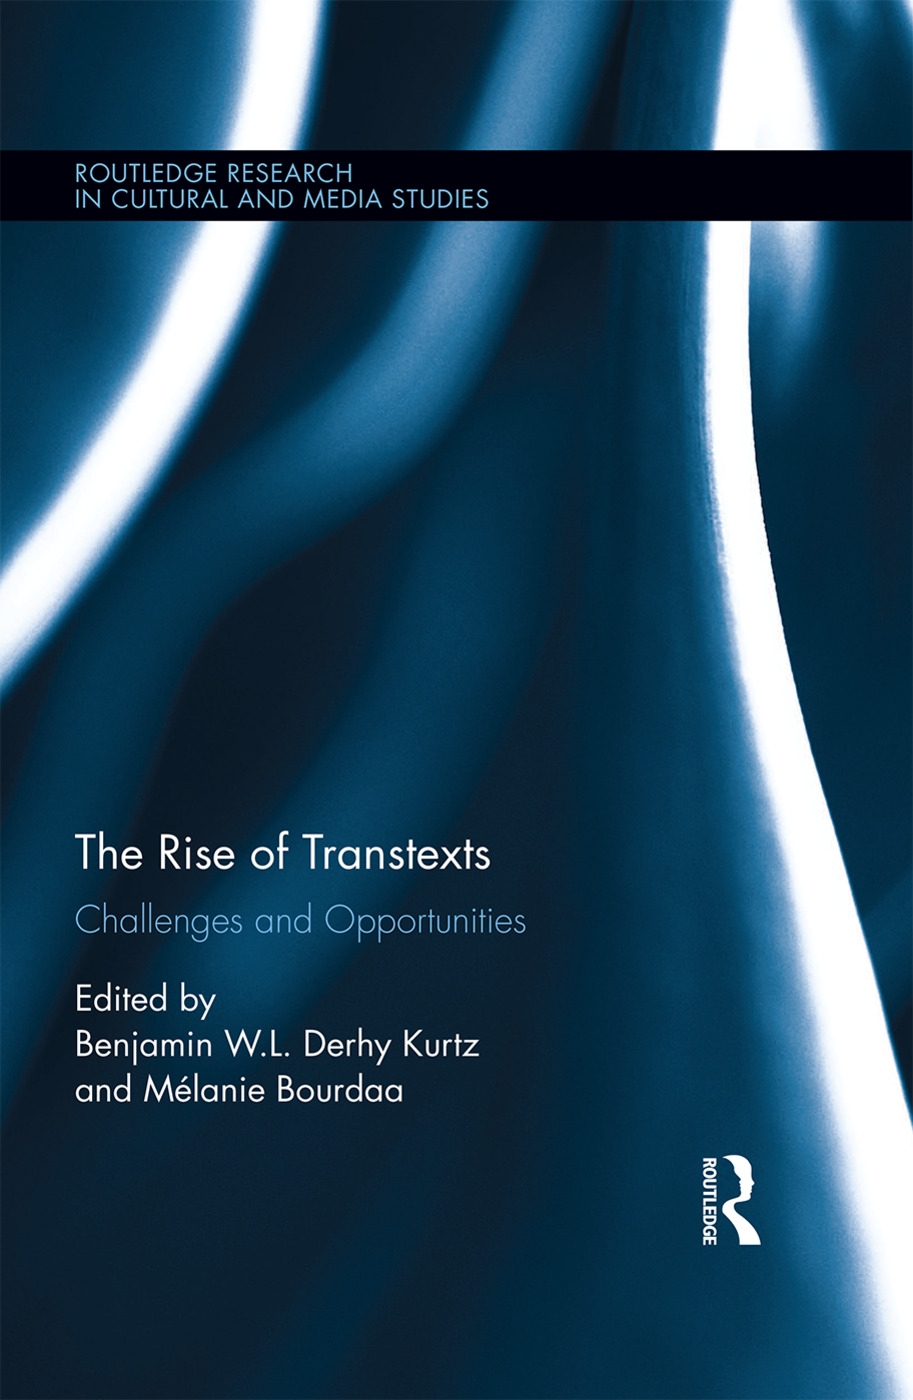 The Rise of Transtexts: Challenges and Opportunities